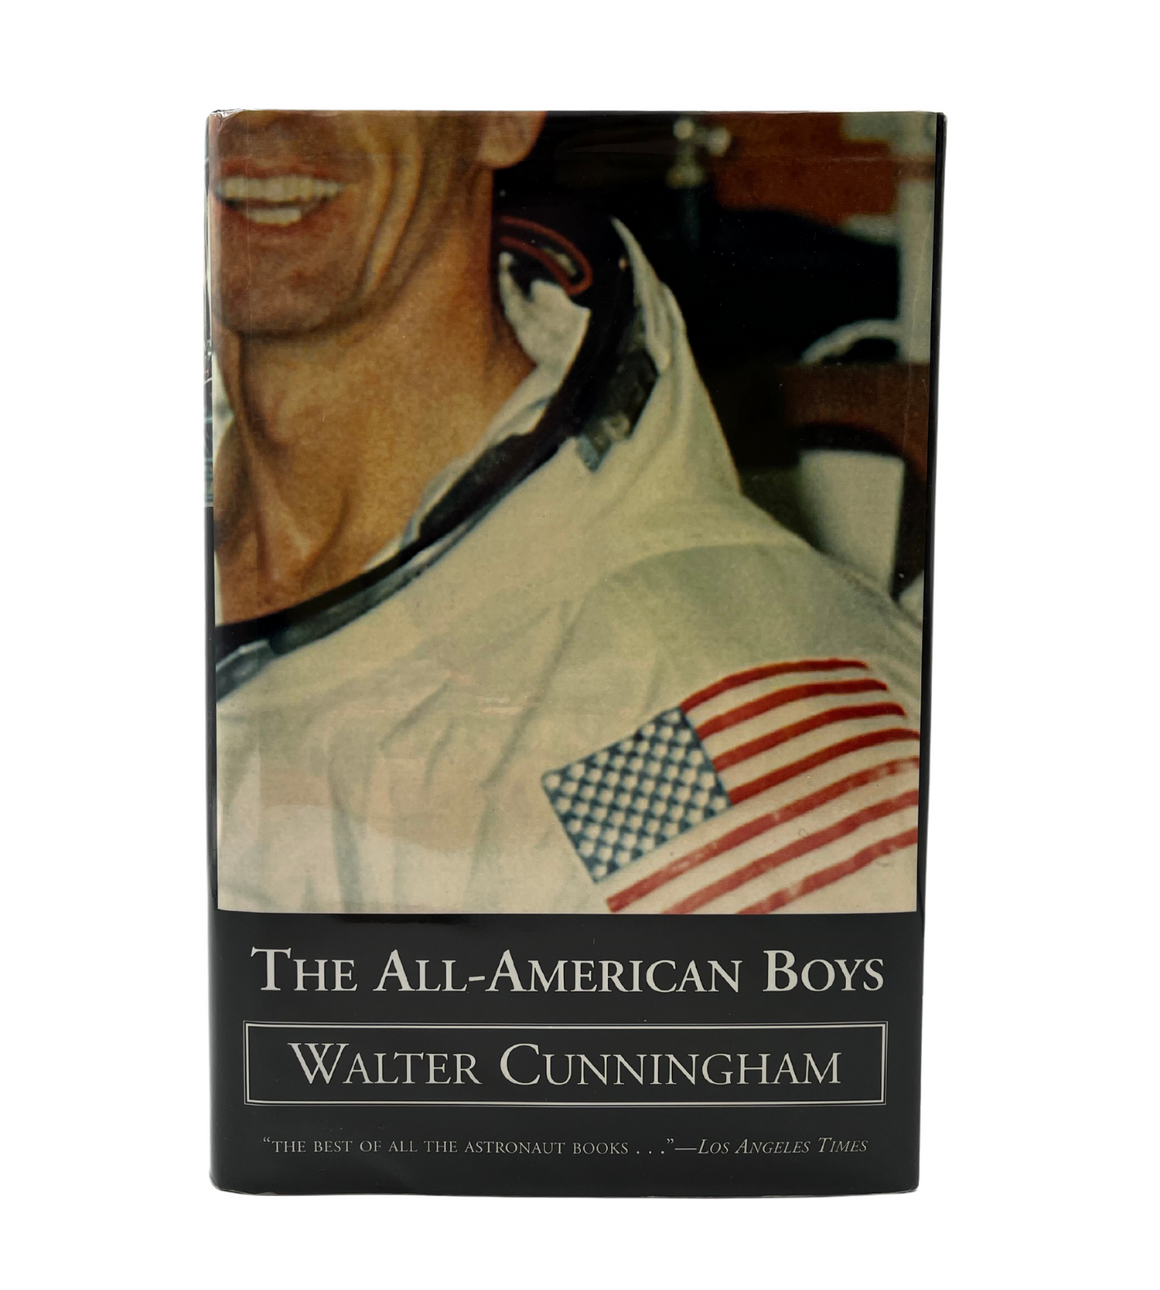 The All-American Boys, Signed and Inscribed by Walter Cunningham, First Updated Edition, 2003